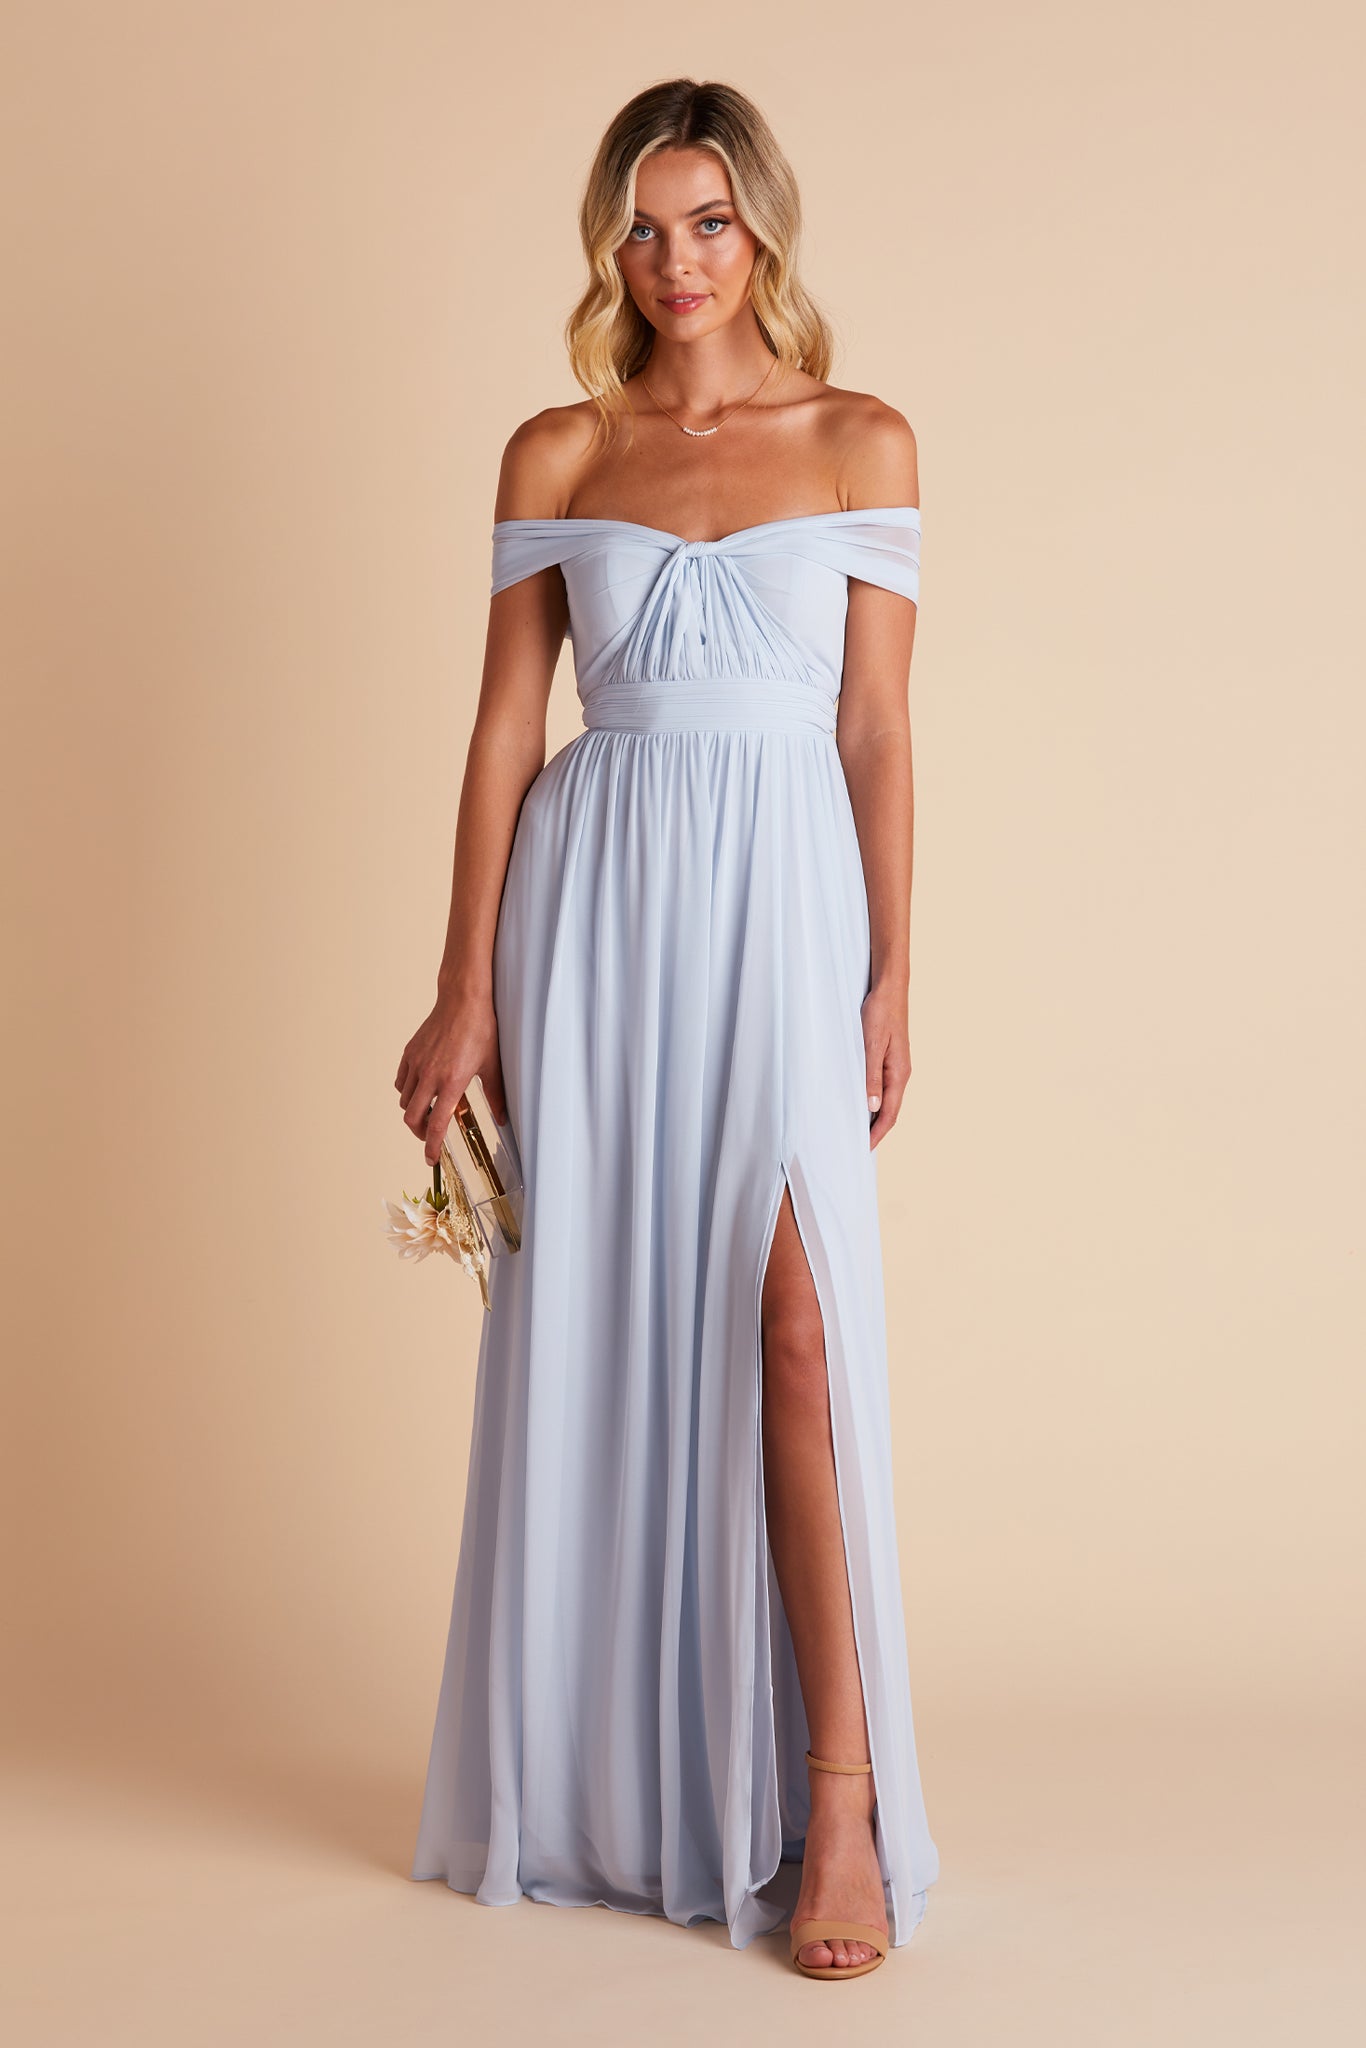 Grace convertible bridesmaid dress in ice blue chiffon by Birdy Grey, front view with hand in pocket